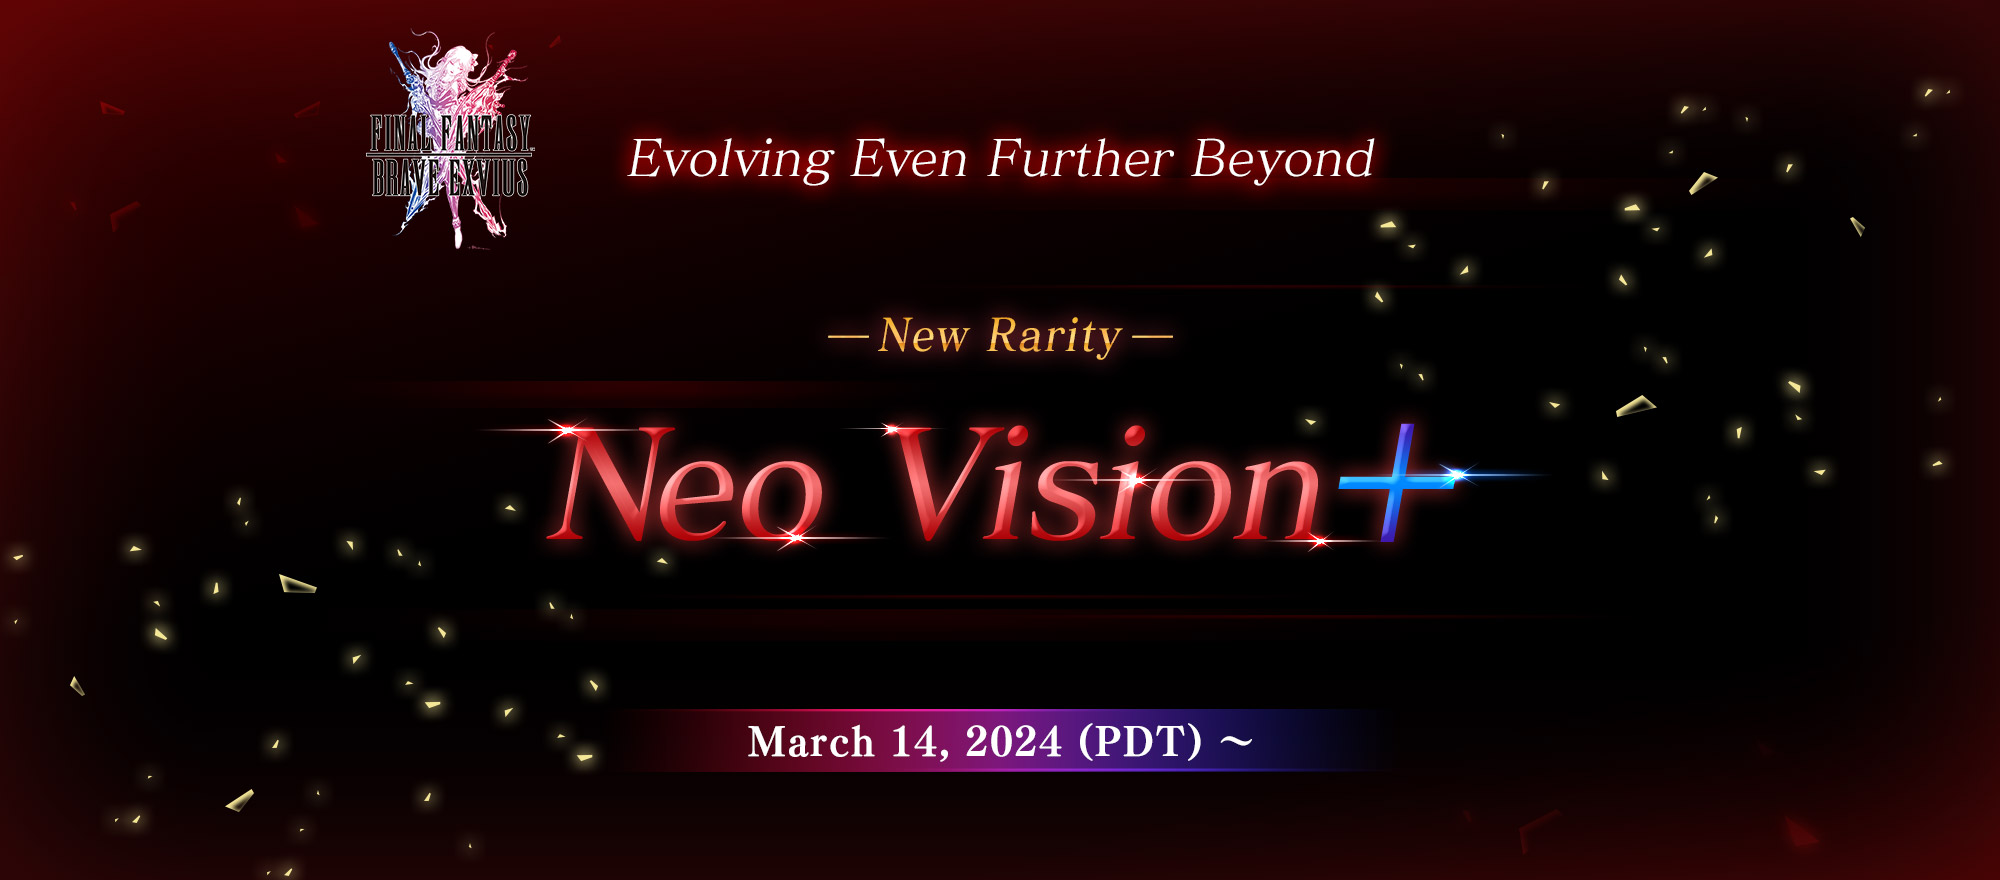 FINAL FANTASY BRAVE EXVIUS Evolving Even Further Beyond -New Rarity- Neo Vision+